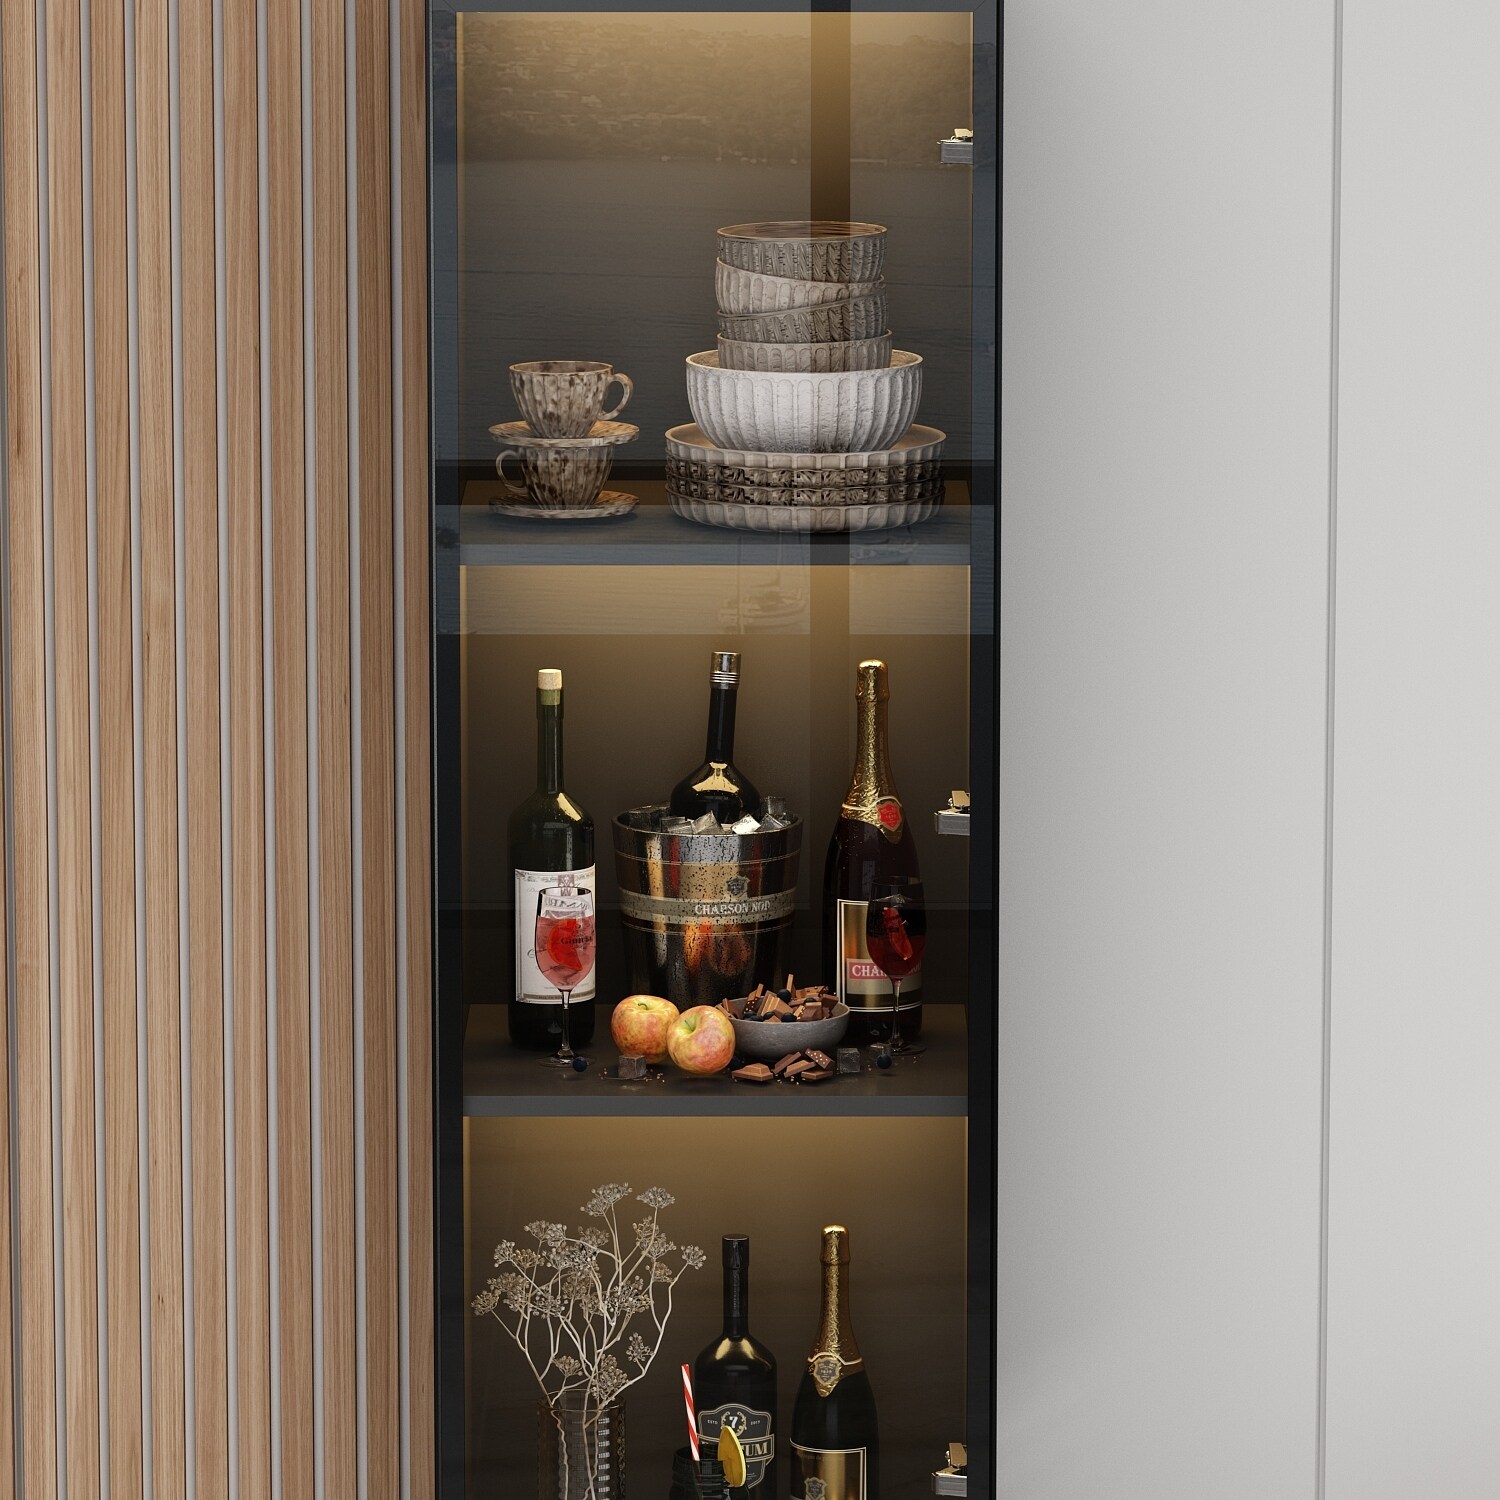 https://ak1.ostkcdn.com/images/products/is/images/direct/104d1febbf583c84fe070fcb296a97b656a66d81/Sleek-Modular-Curio-Wine-Cabinet-Storage-Solution-with-Glass-Doors.jpg